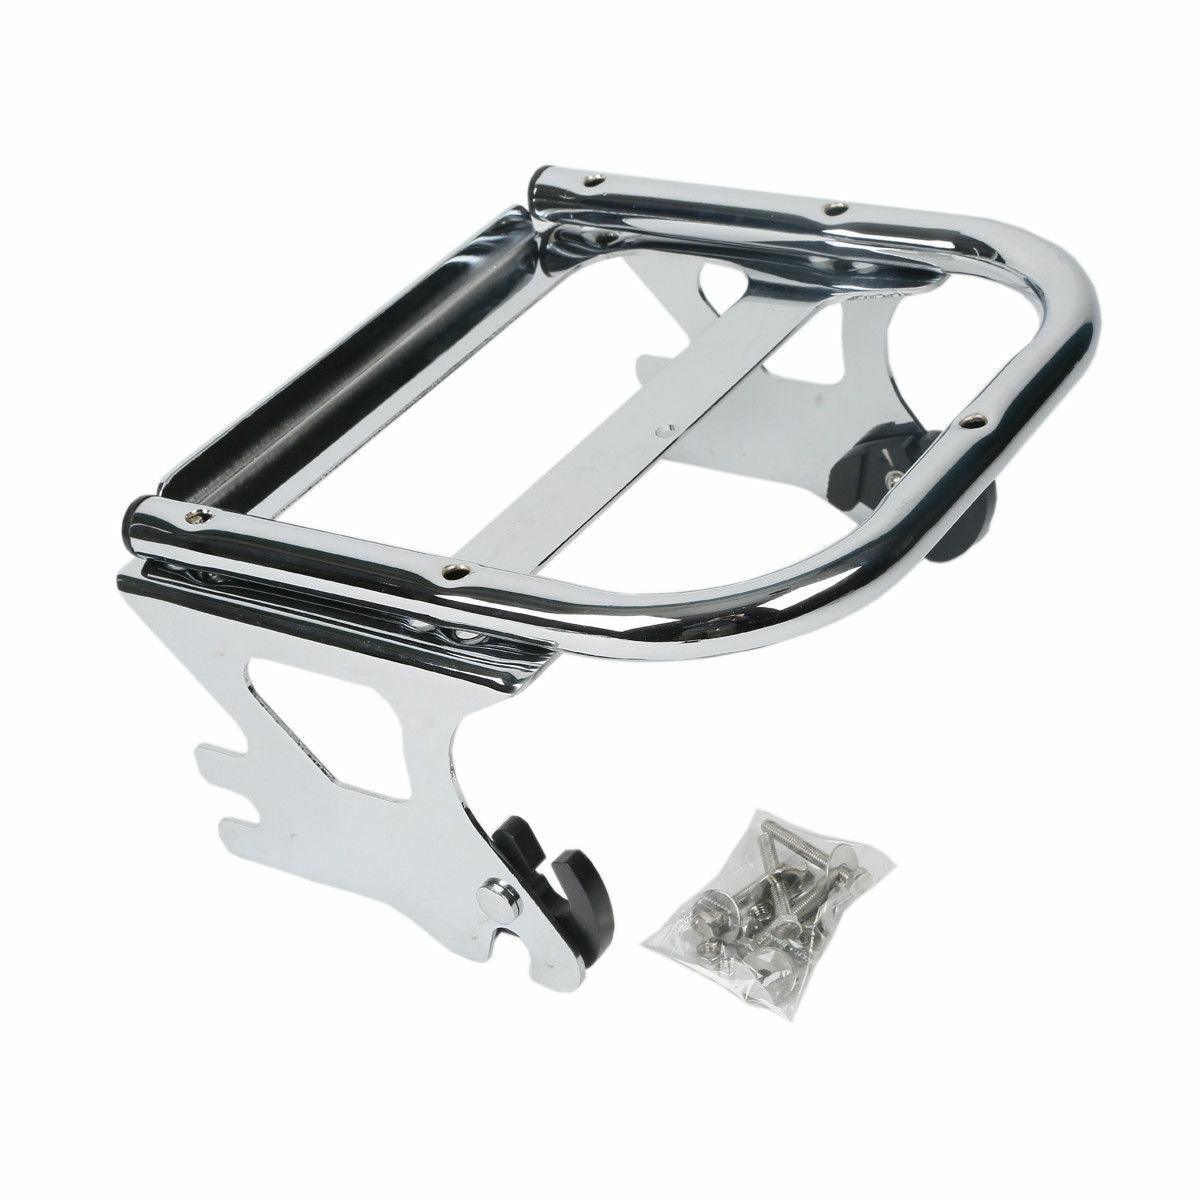 Detachable Two-up Tour Pak Pack Mounting Luggage Rack For Harley Touring 1997-08 - Moto Life Products